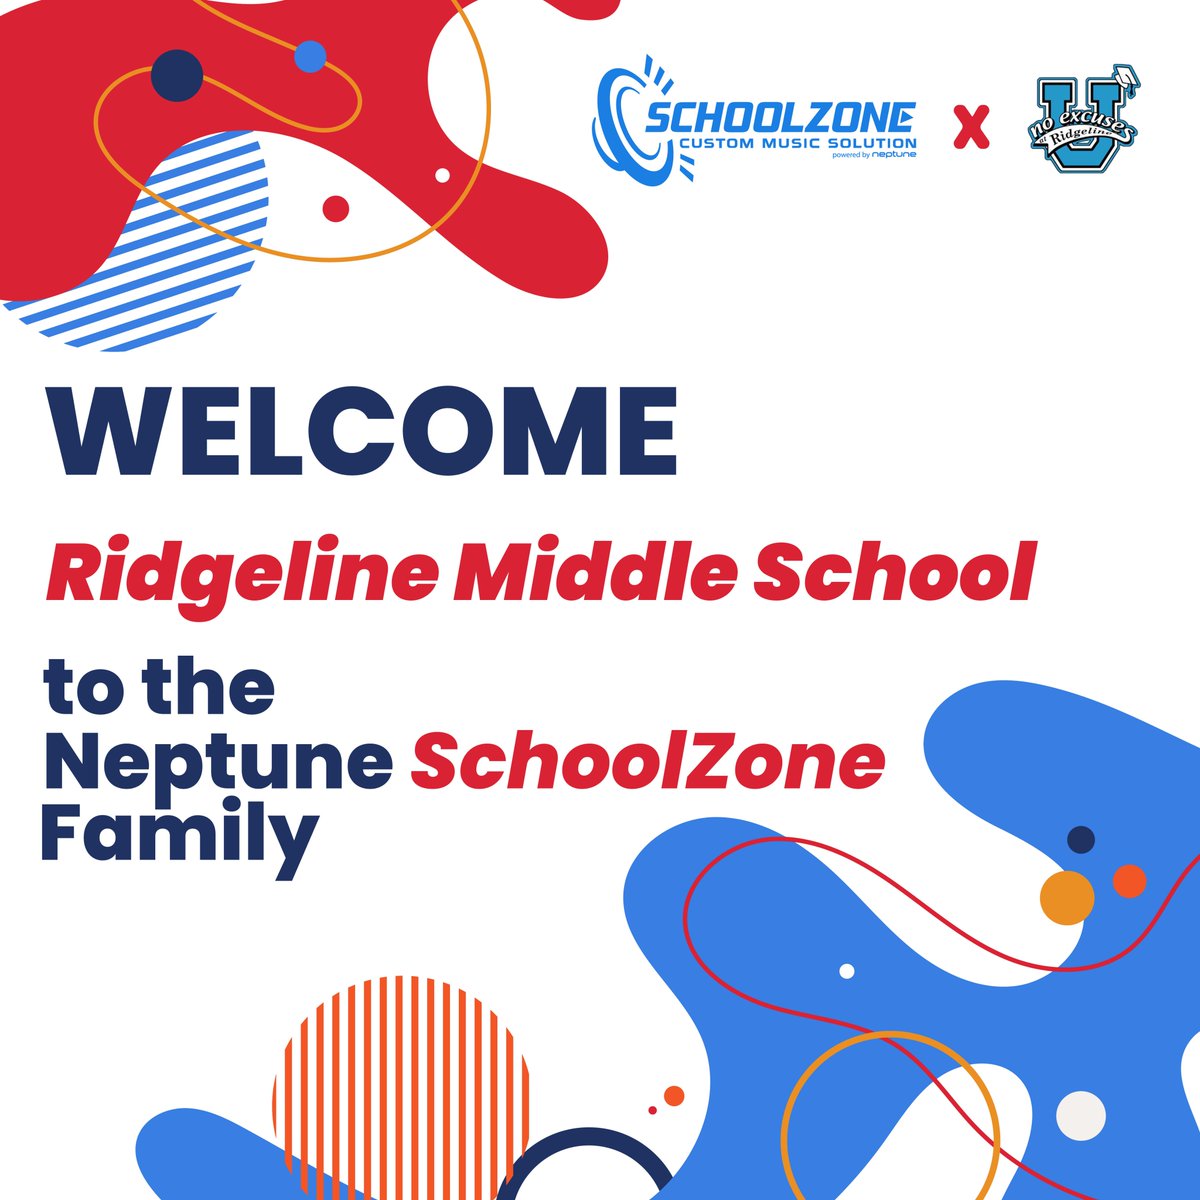 Neptune SchoolZone extends a warm welcome to our newest partner, @Ridgeline_MS in Washington! We’re excited to provide 100% lyric-safe music and a professional radio sound for an enhanced school experience. 🍎🎶